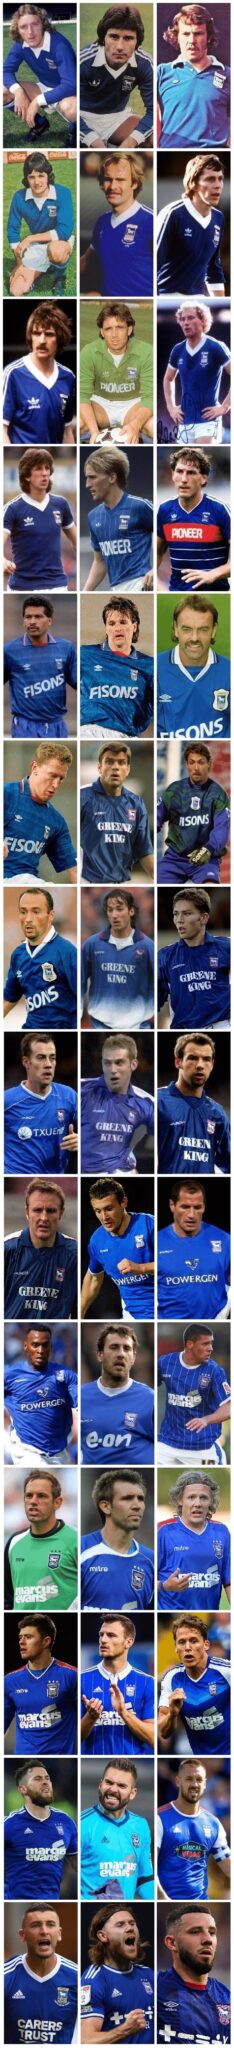 Ipswich Town Player of the Year